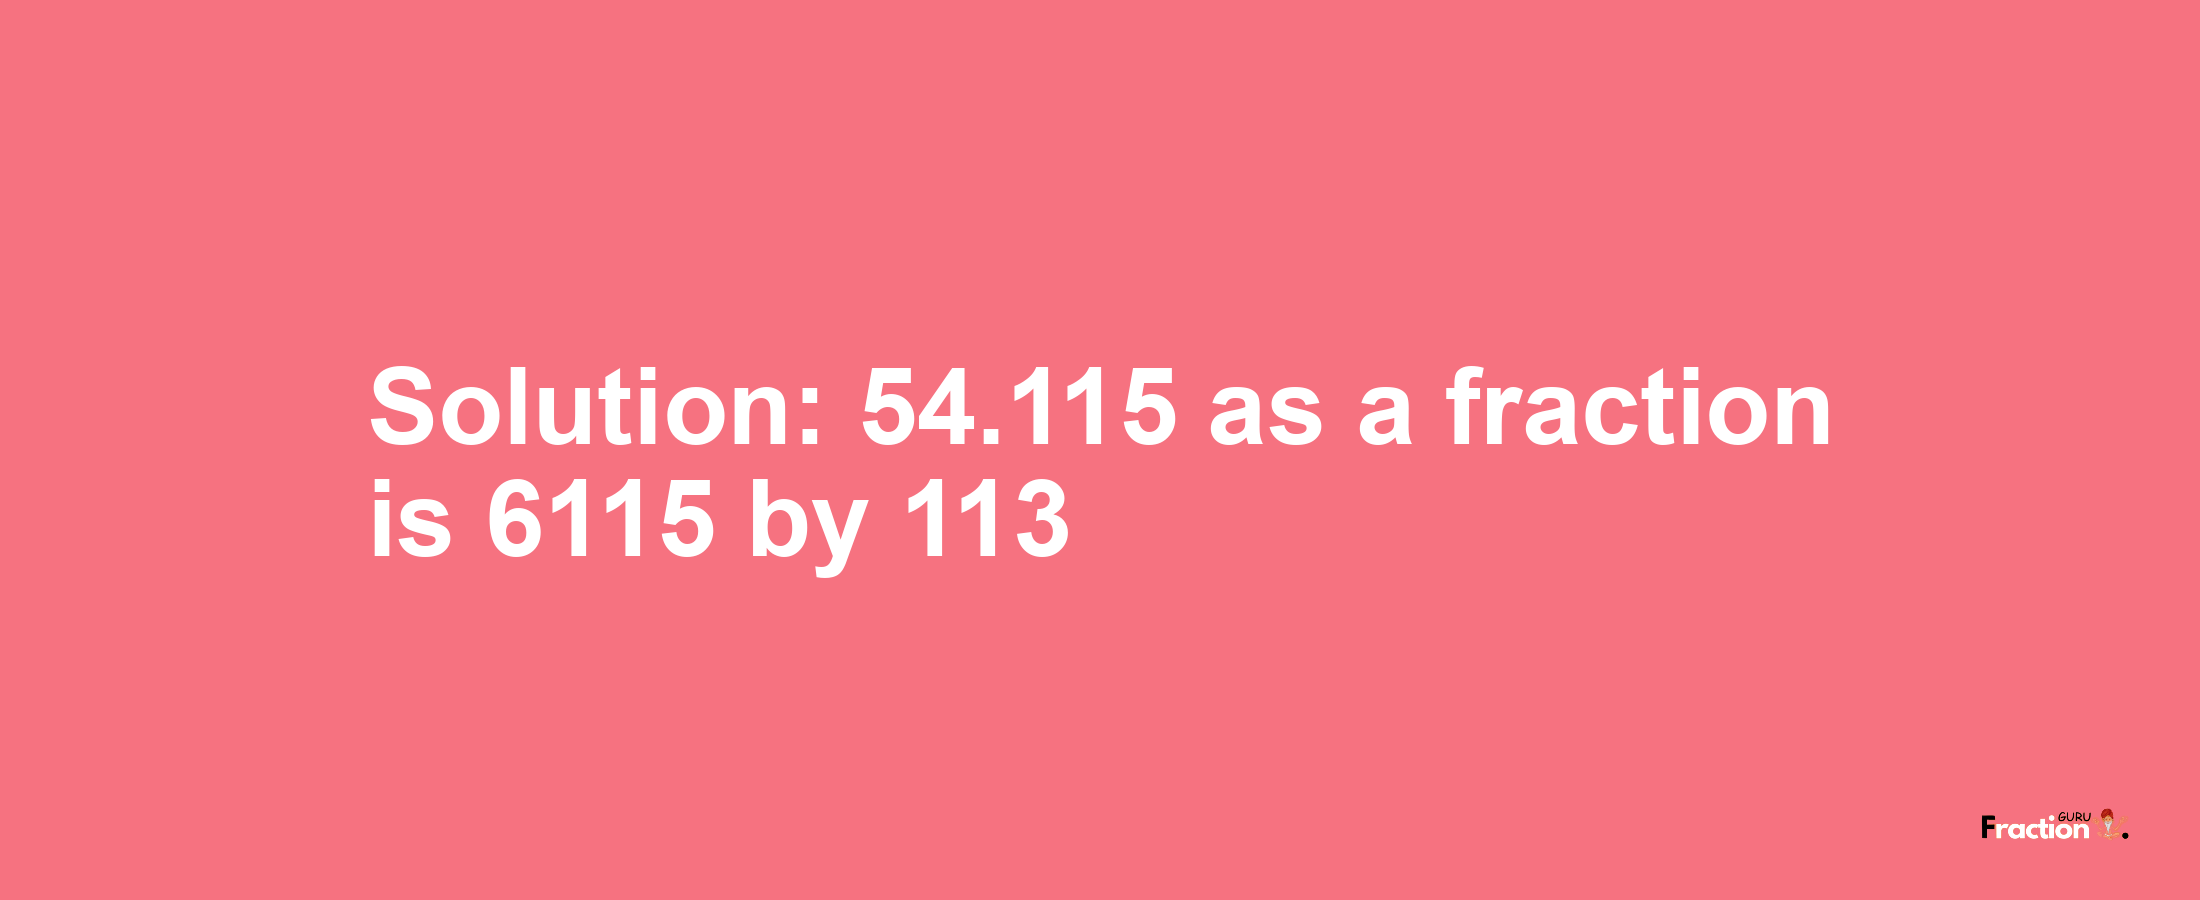 Solution:54.115 as a fraction is 6115/113